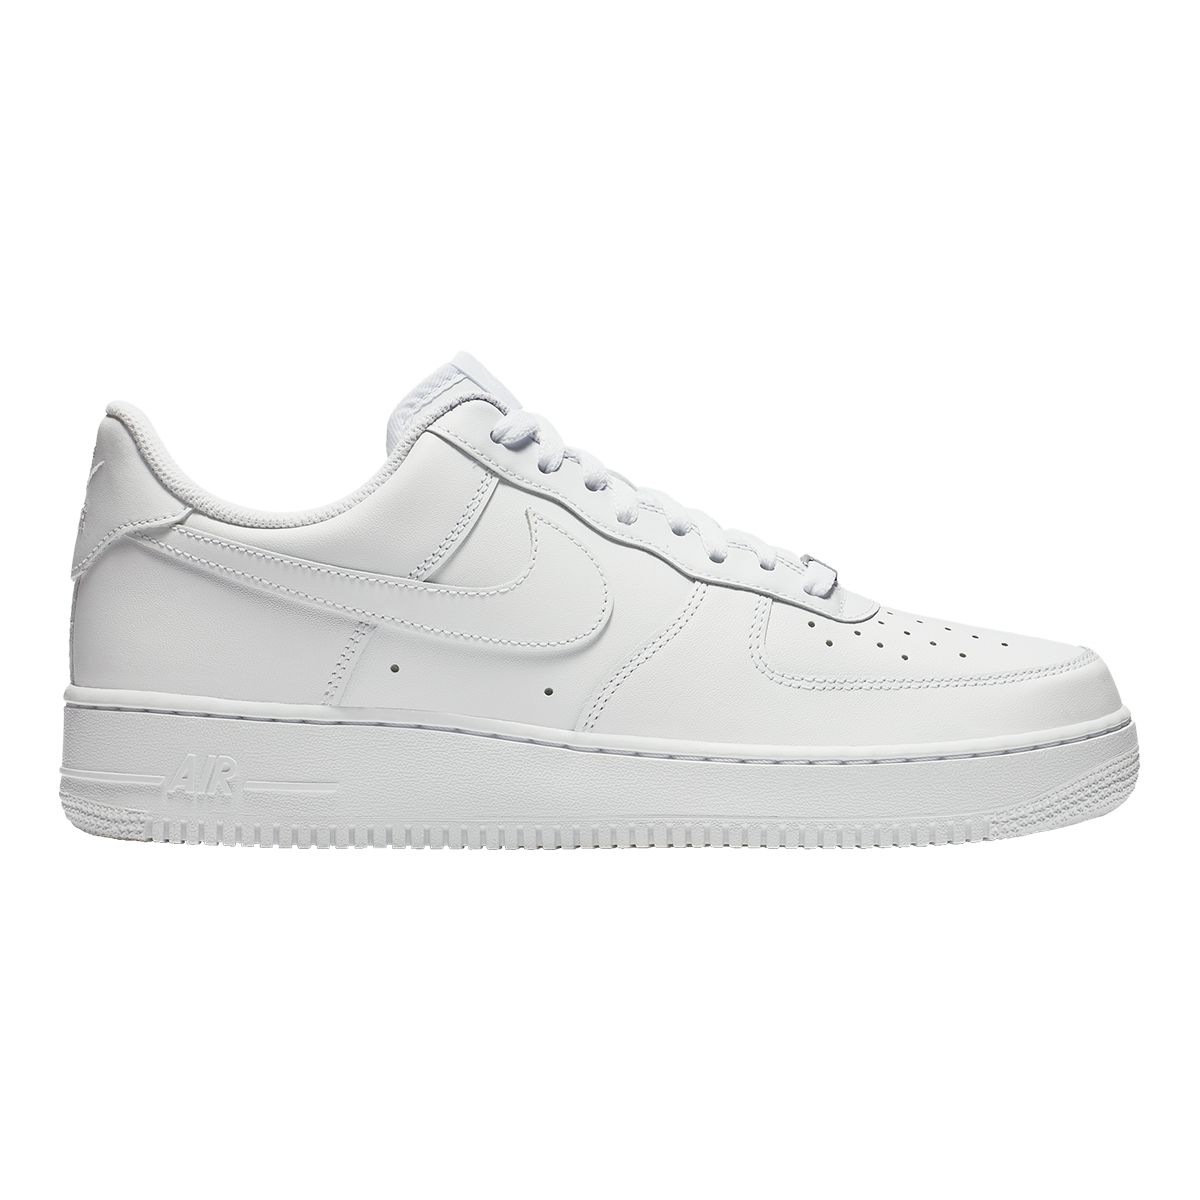 Image of Nike Men's Air Force 1 '07 Shoes Sneakers Low Top Basketball